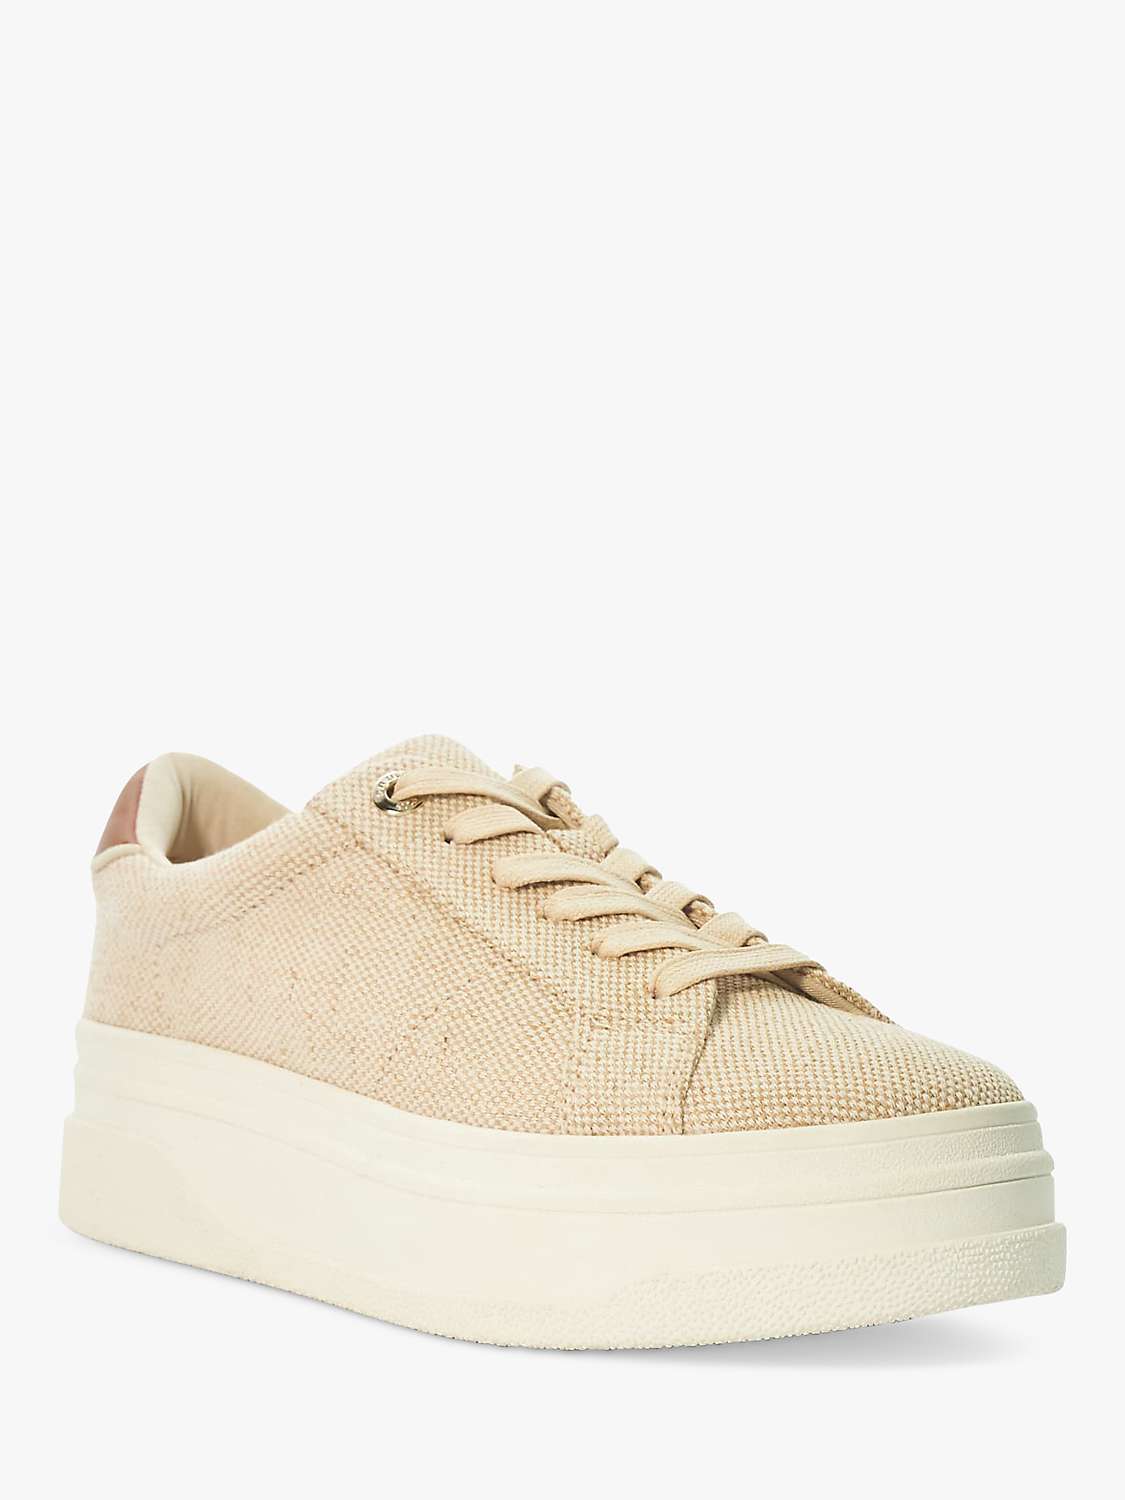 Buy Dune Exaggerate Canvas Flatform Trainers, Beige Online at johnlewis.com